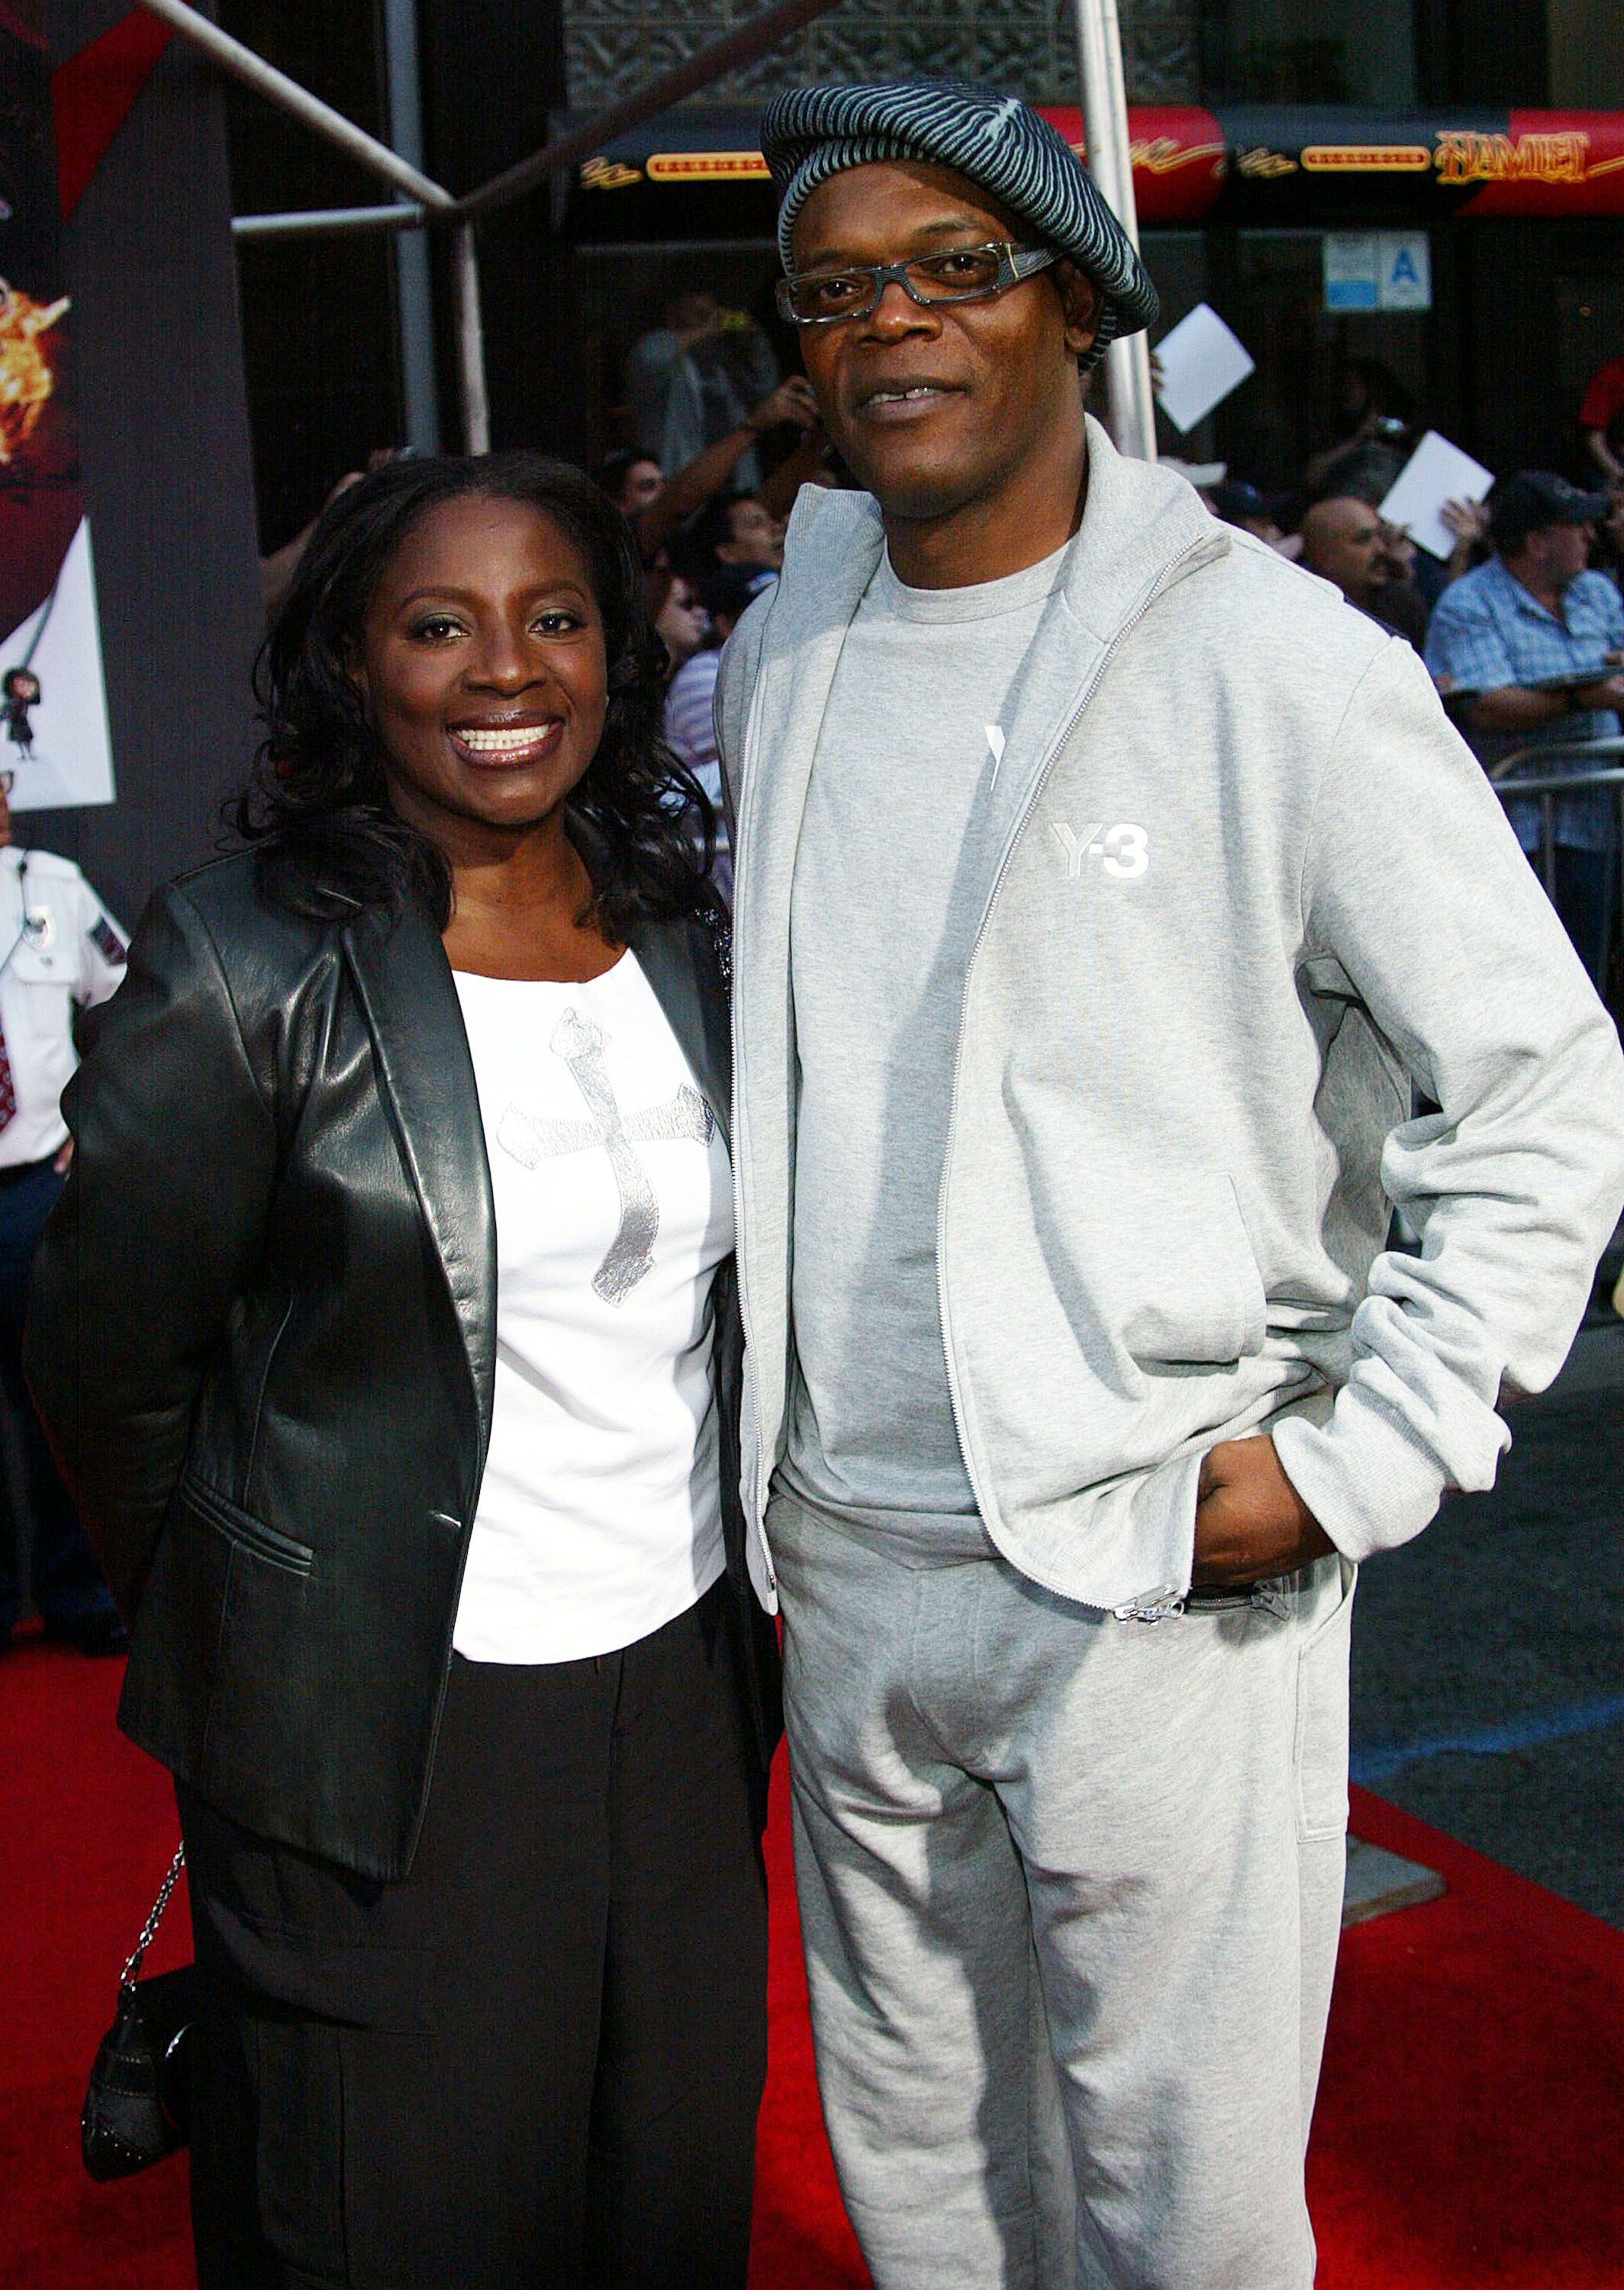 Samuel L. Jackson and wife LaTanya Richardson at the film premiere of "The Incredibles" in Hollywood, California in 2004 | Source: Getty Images